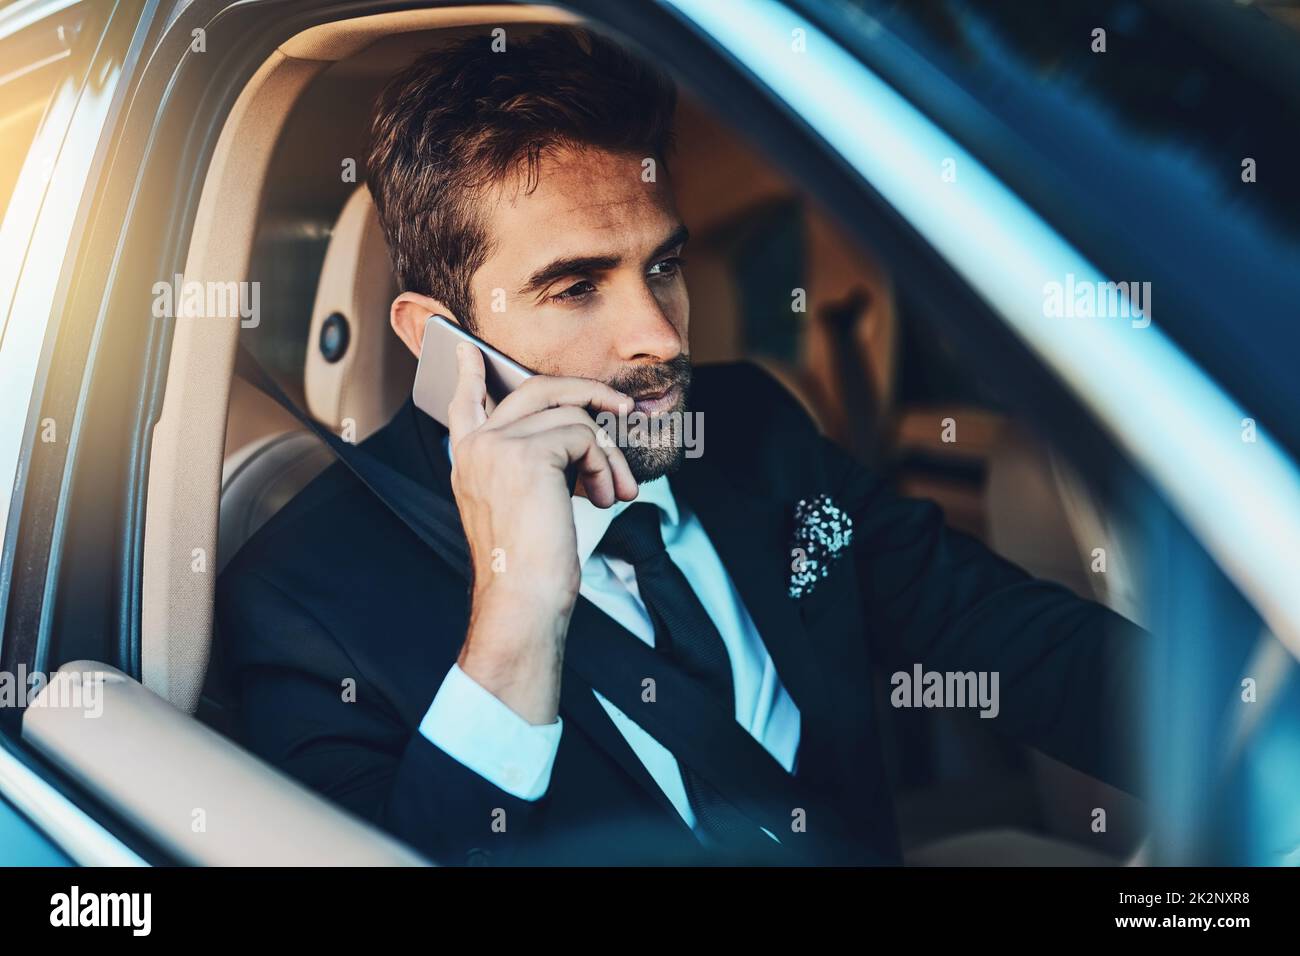 I cannot take this call, Im driving. Cropped shot of a handsome young corporate businessman on a call while commuting. Stock Photo